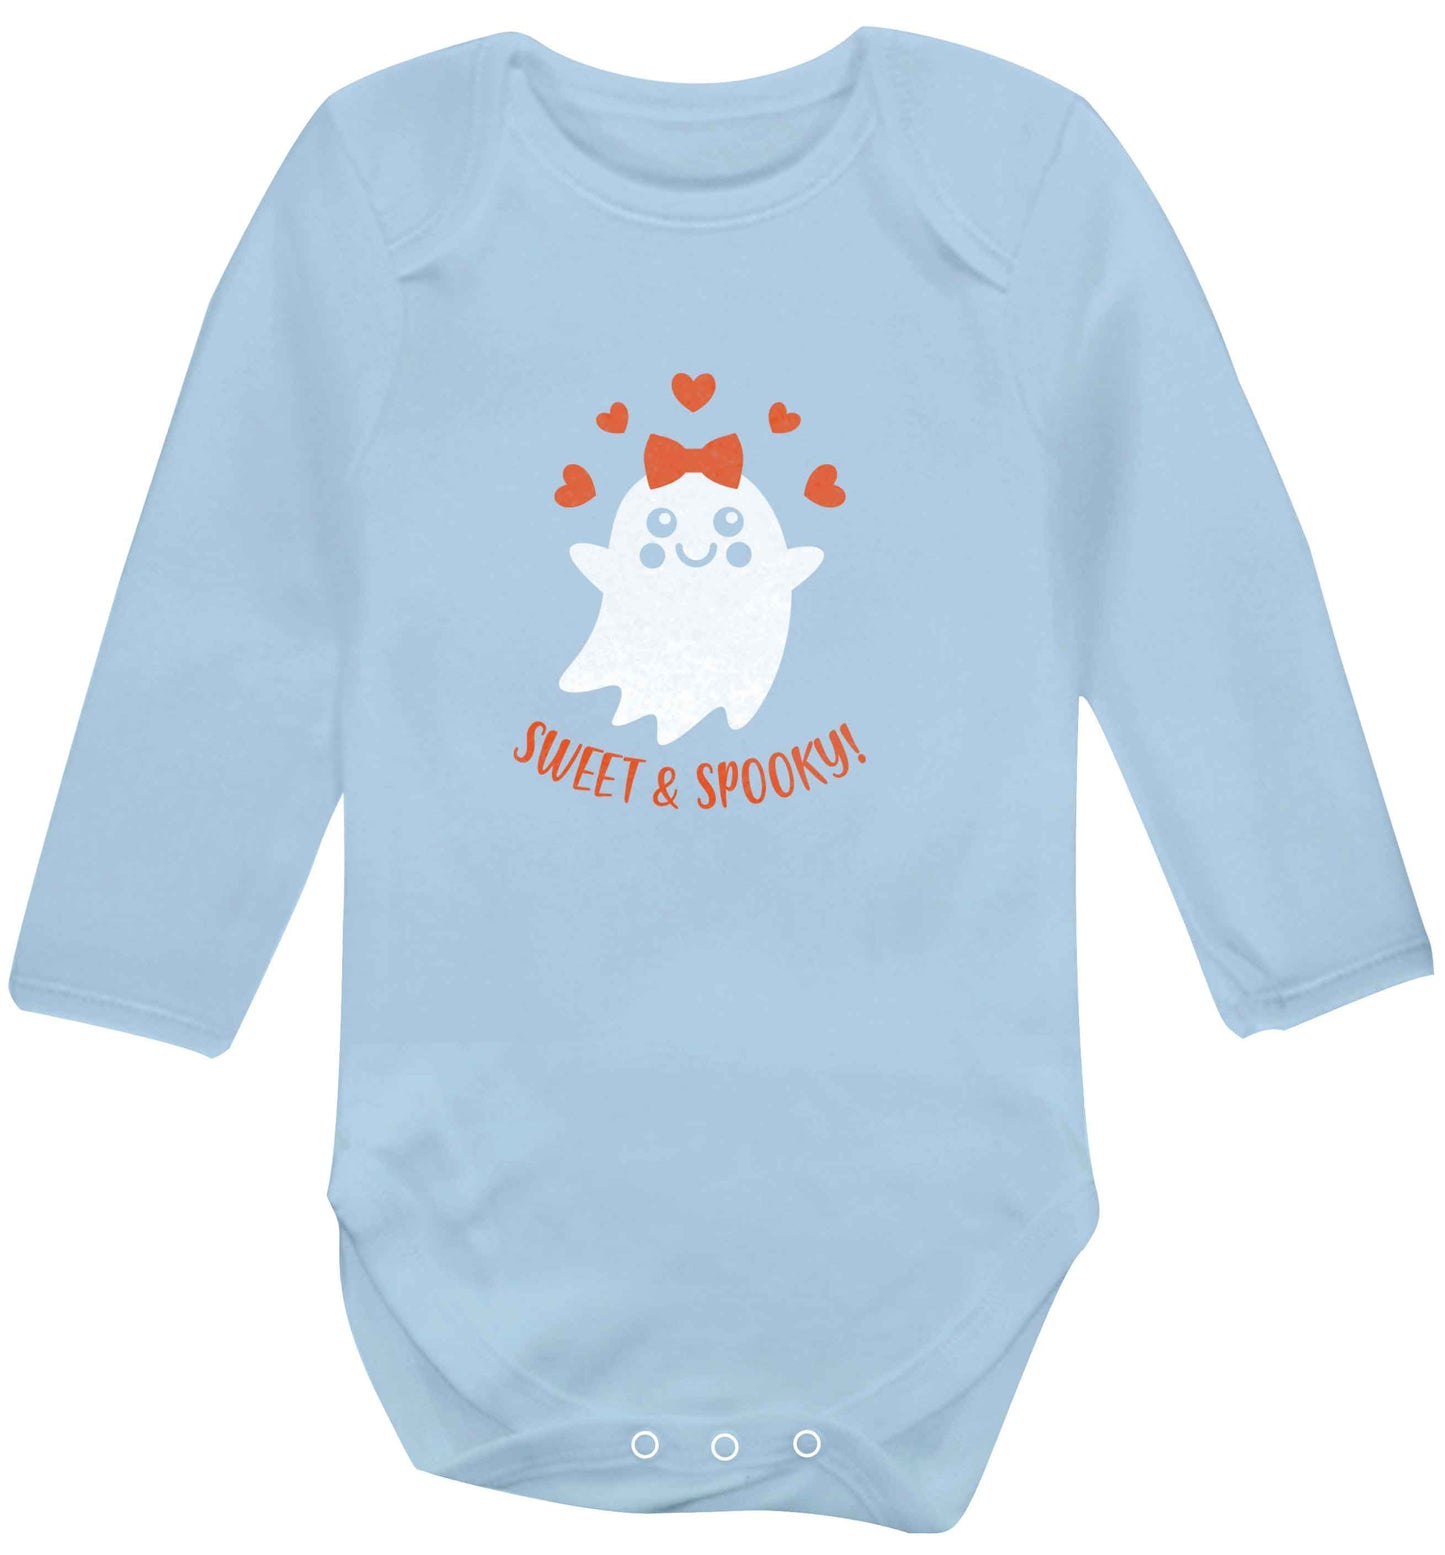 Sweet and spooky baby vest long sleeved pale blue 6-12 months